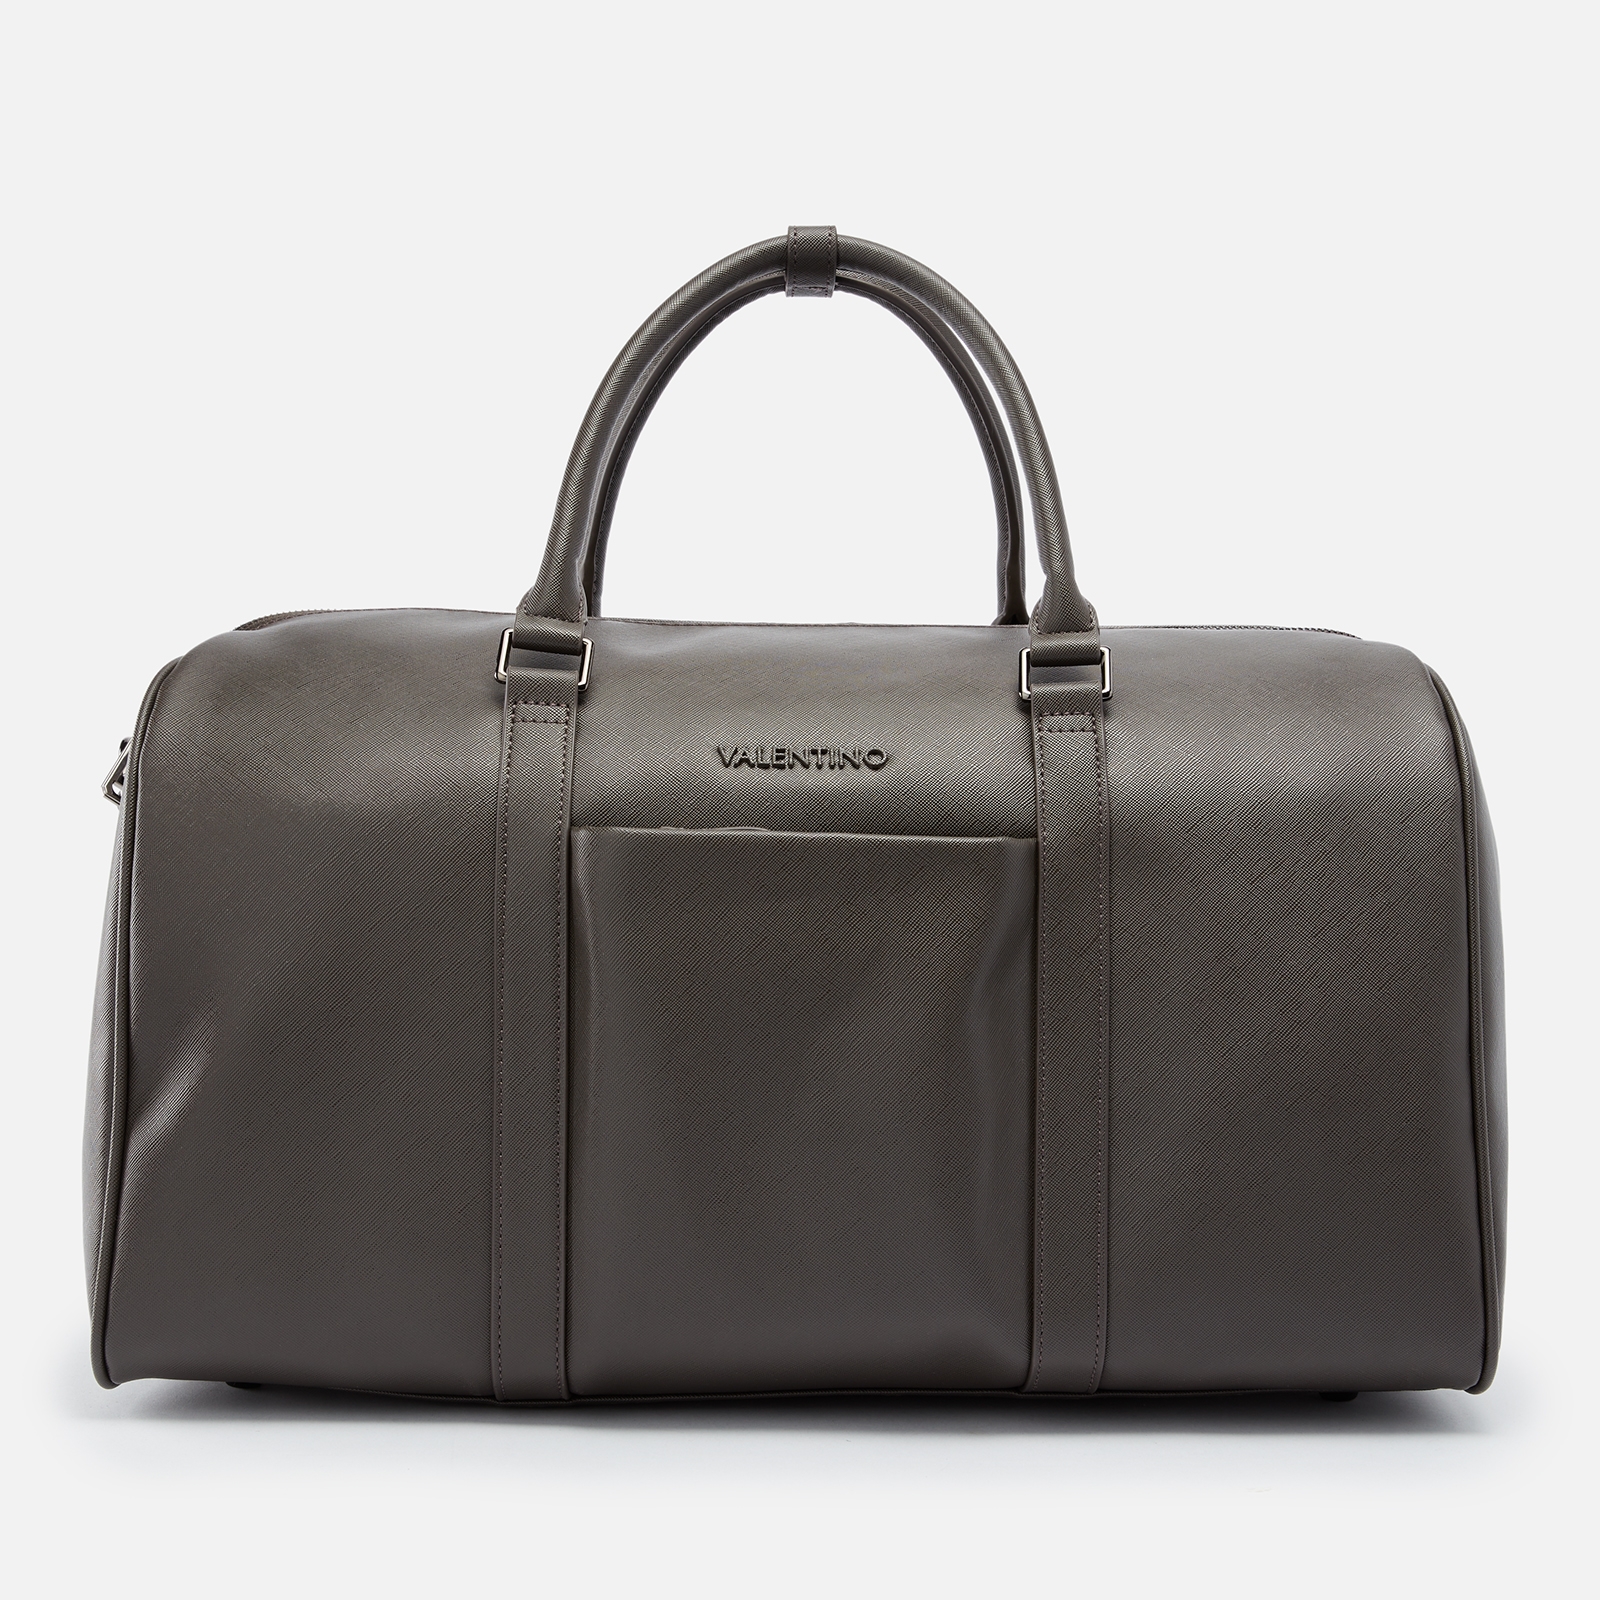 Valentino Ivan Recycled Faux Leather Duffle Bag